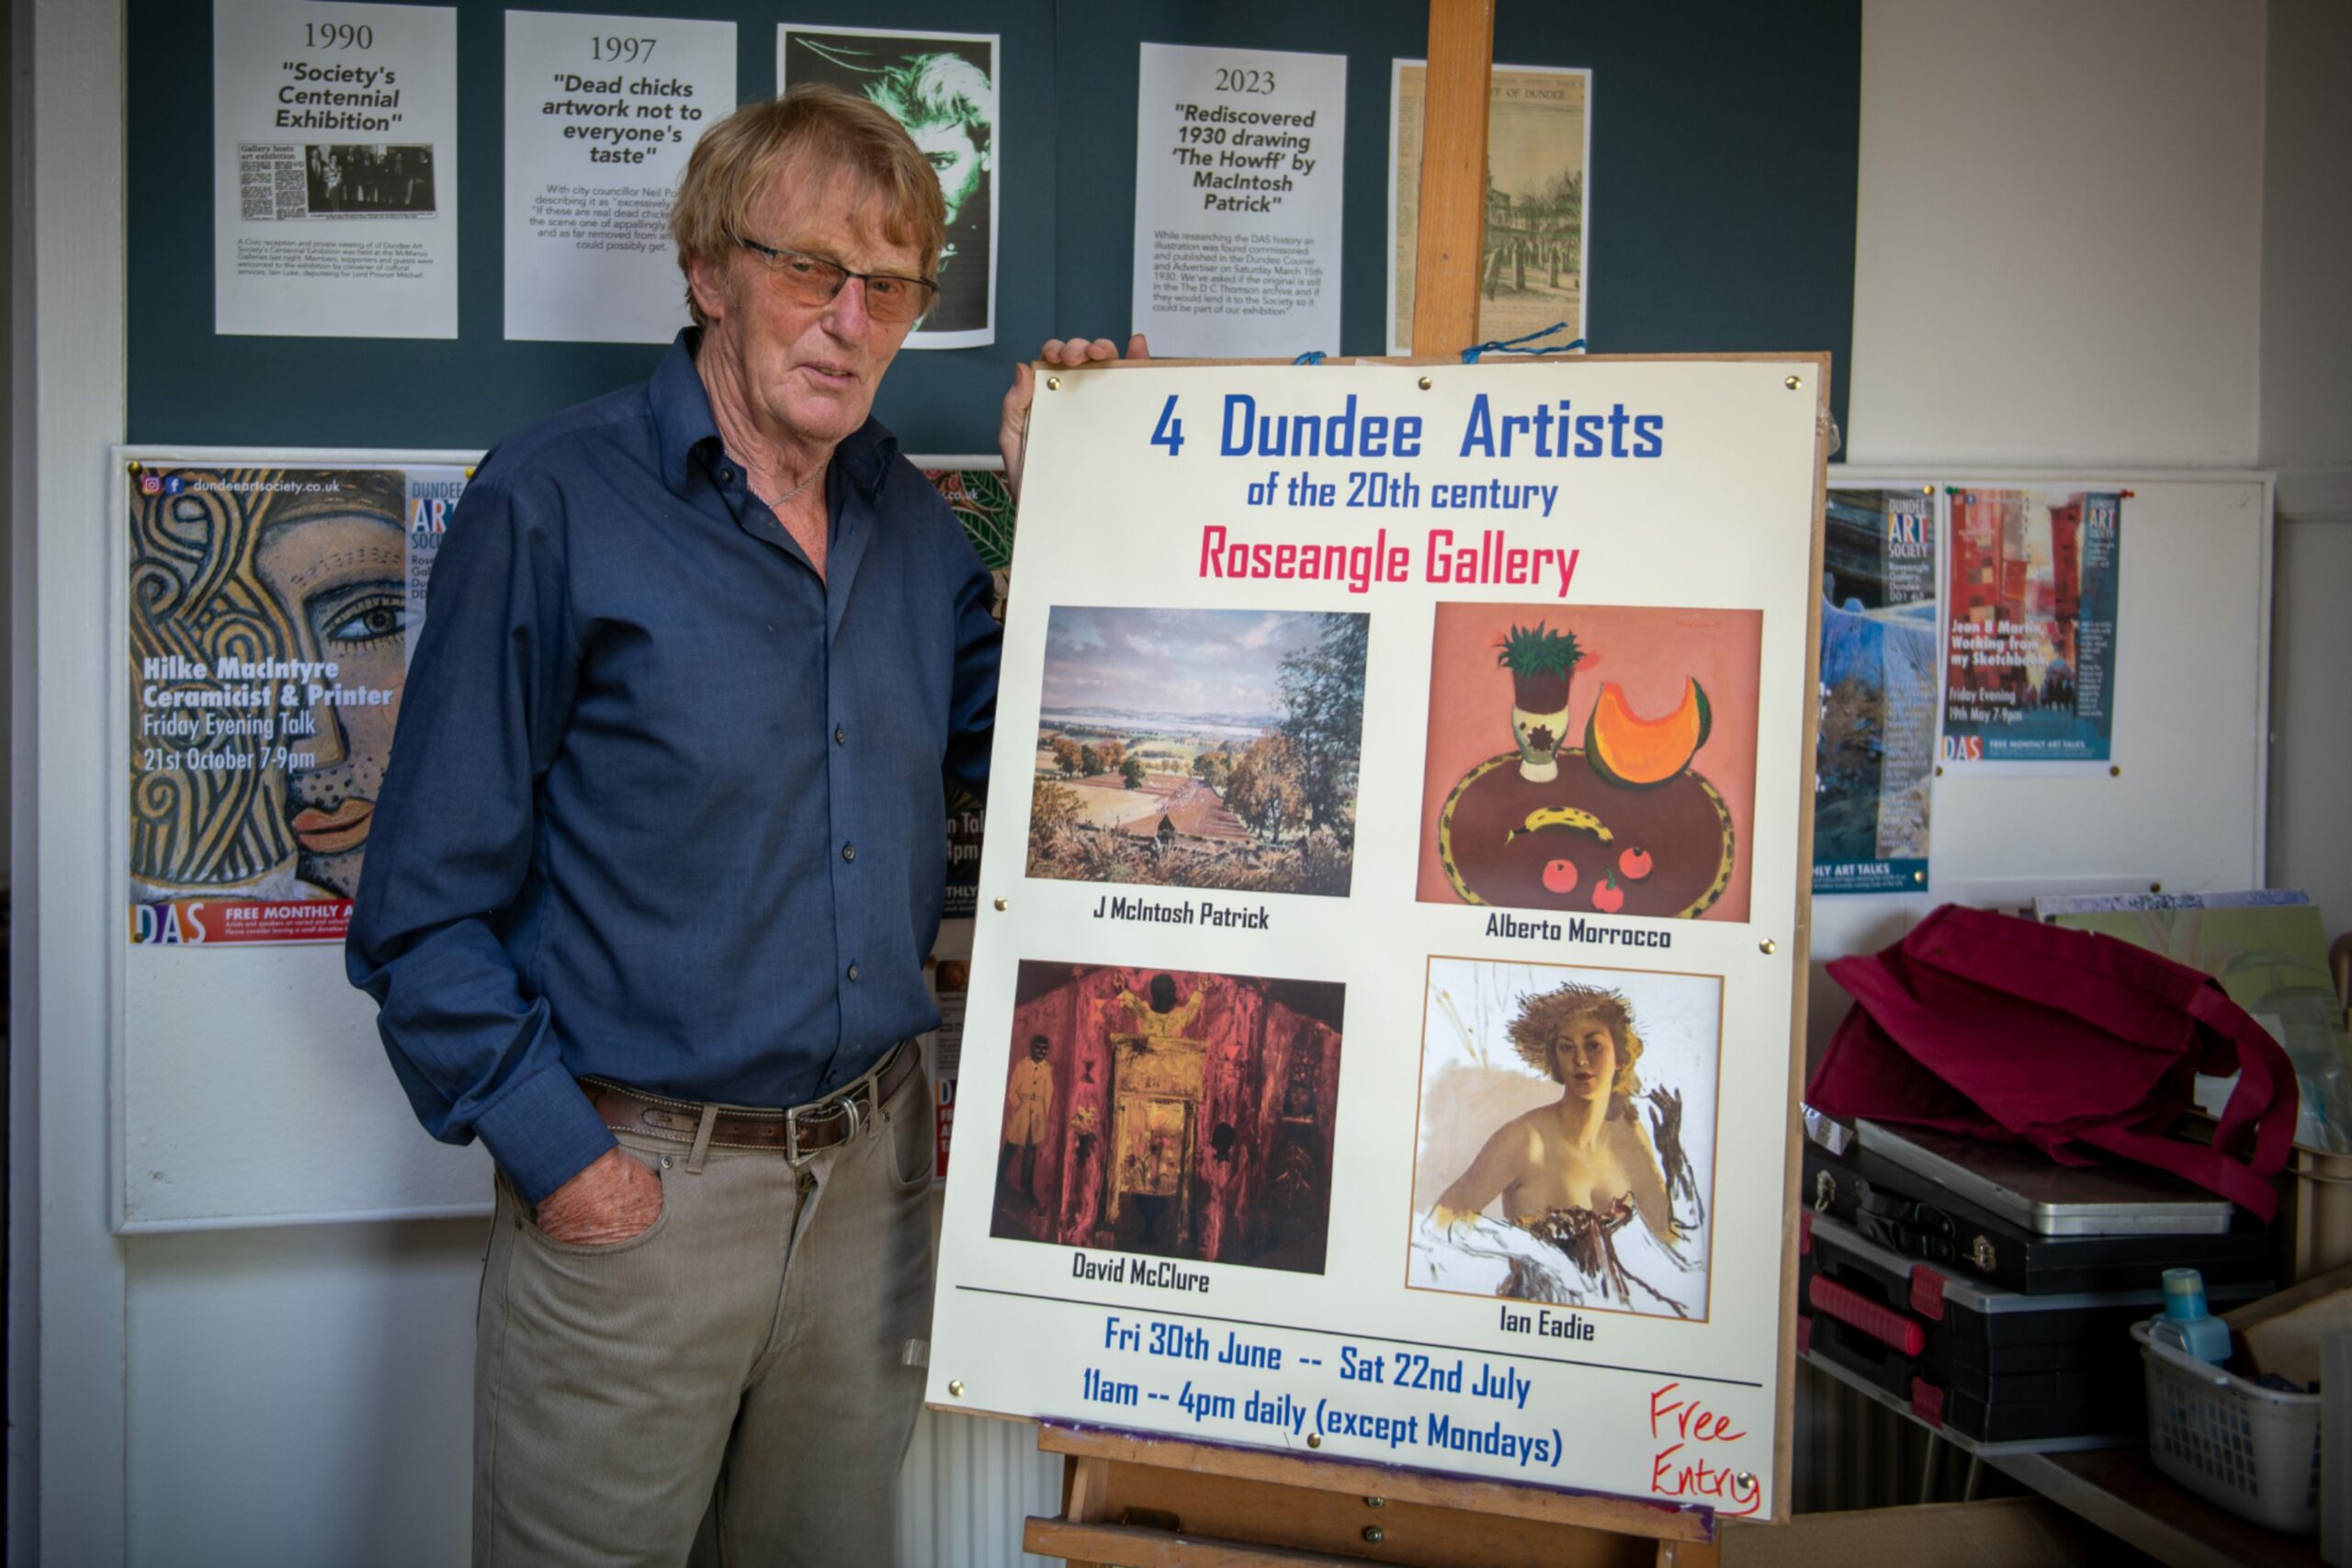 Alan Lawson from Dundee Art Society with the Four Dundee Artists exhibition poster.